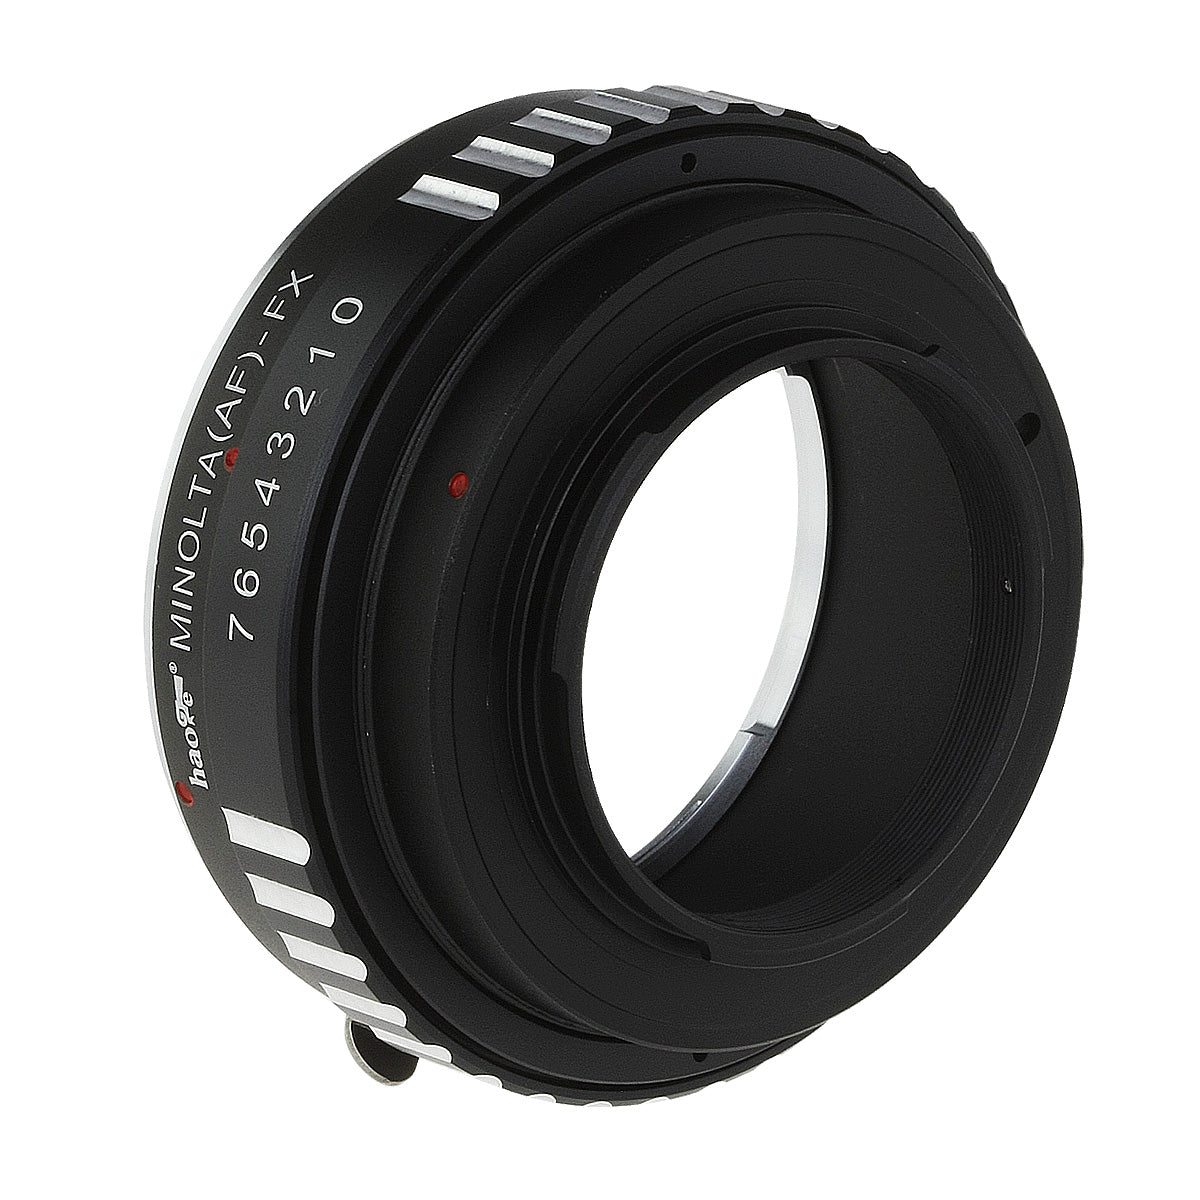 Haoge Lens Mount Adapter for Sony Alpha A-type Minolta MA AF Mount Lens to Fujifilm X-mount Camera such as X-A1, X-A2, X-A3, X-A10, X-E1, X-E2, X-E2s, X-M1, X-Pro1, X-Pro2, X-T1, X-T2, X-T10, X-T20